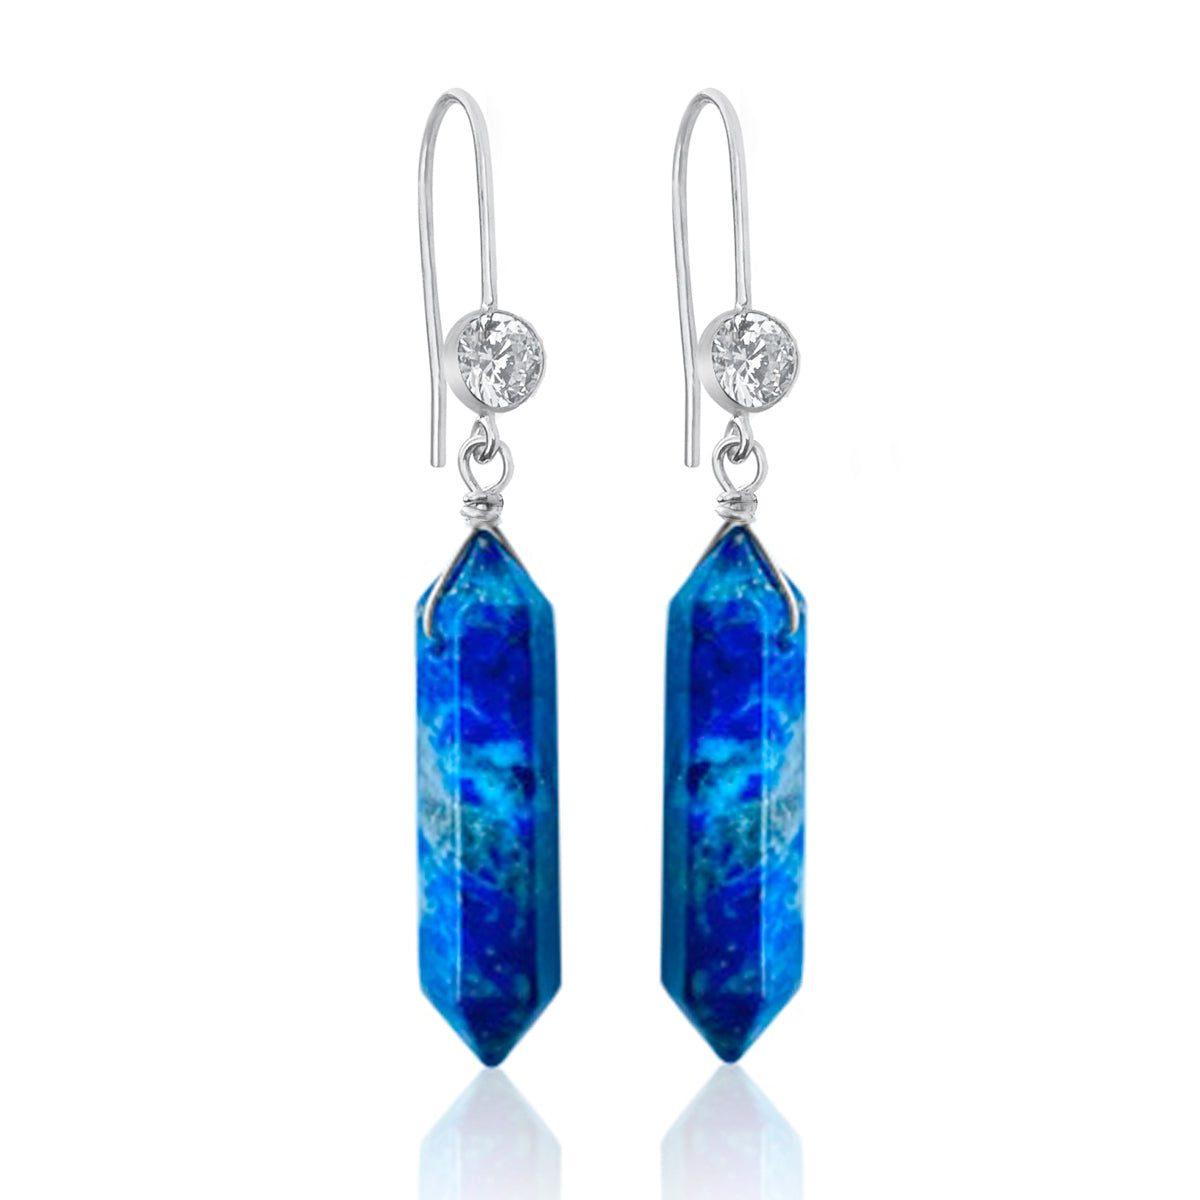 The Lapis Lazuli Meditation Earrings are a stunning pair of earrings that combine natural beauty with spiritual significance. Each earring features a double-pointed Lapis Lazuli stone, which is known for its deep blue color and unique veining. 